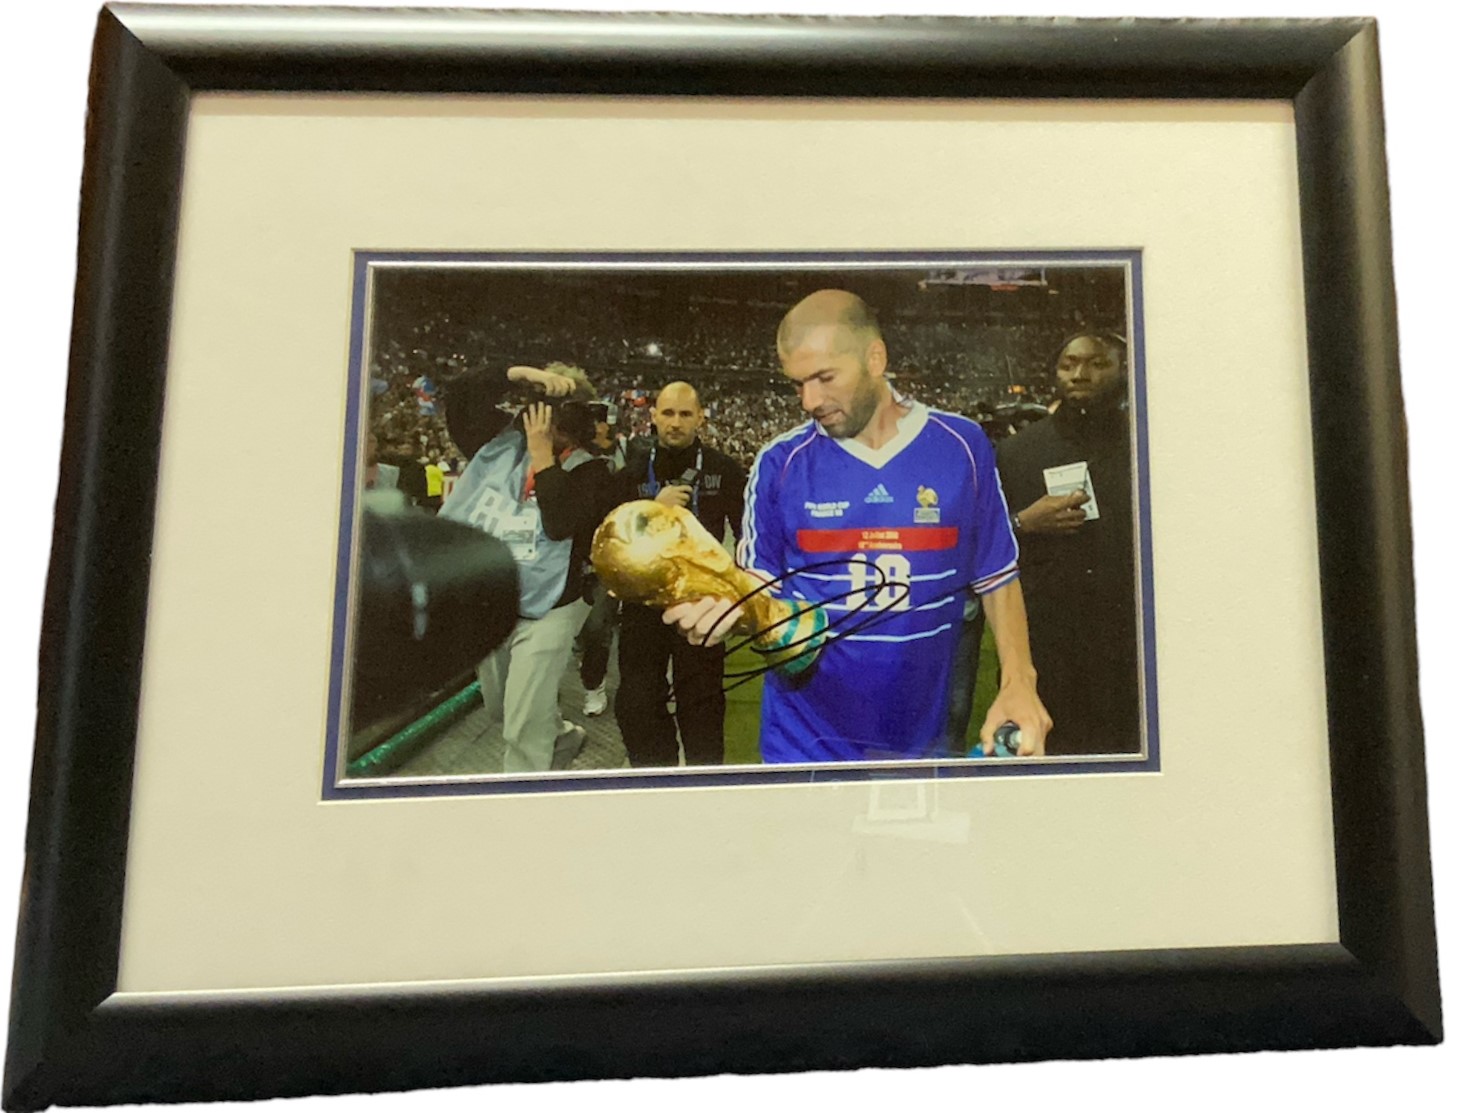 Zinedine Zidane signed photo framed. Good Condition. All autographs come with a Certificate of